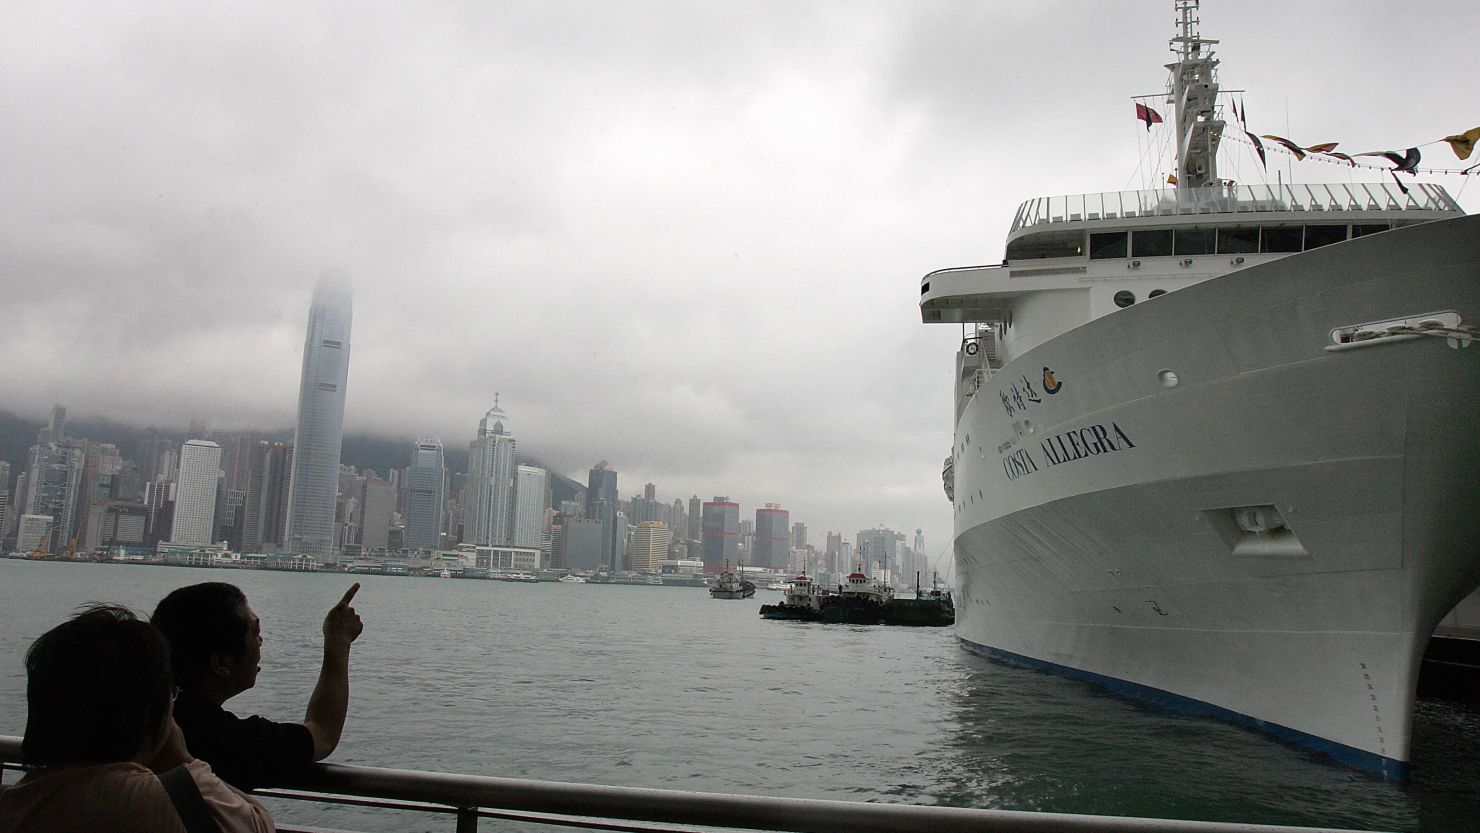 The Costa Allegra berthed in Hong Kong prior to its maiden voyage to Mumbai, India, on May 29, 2006.